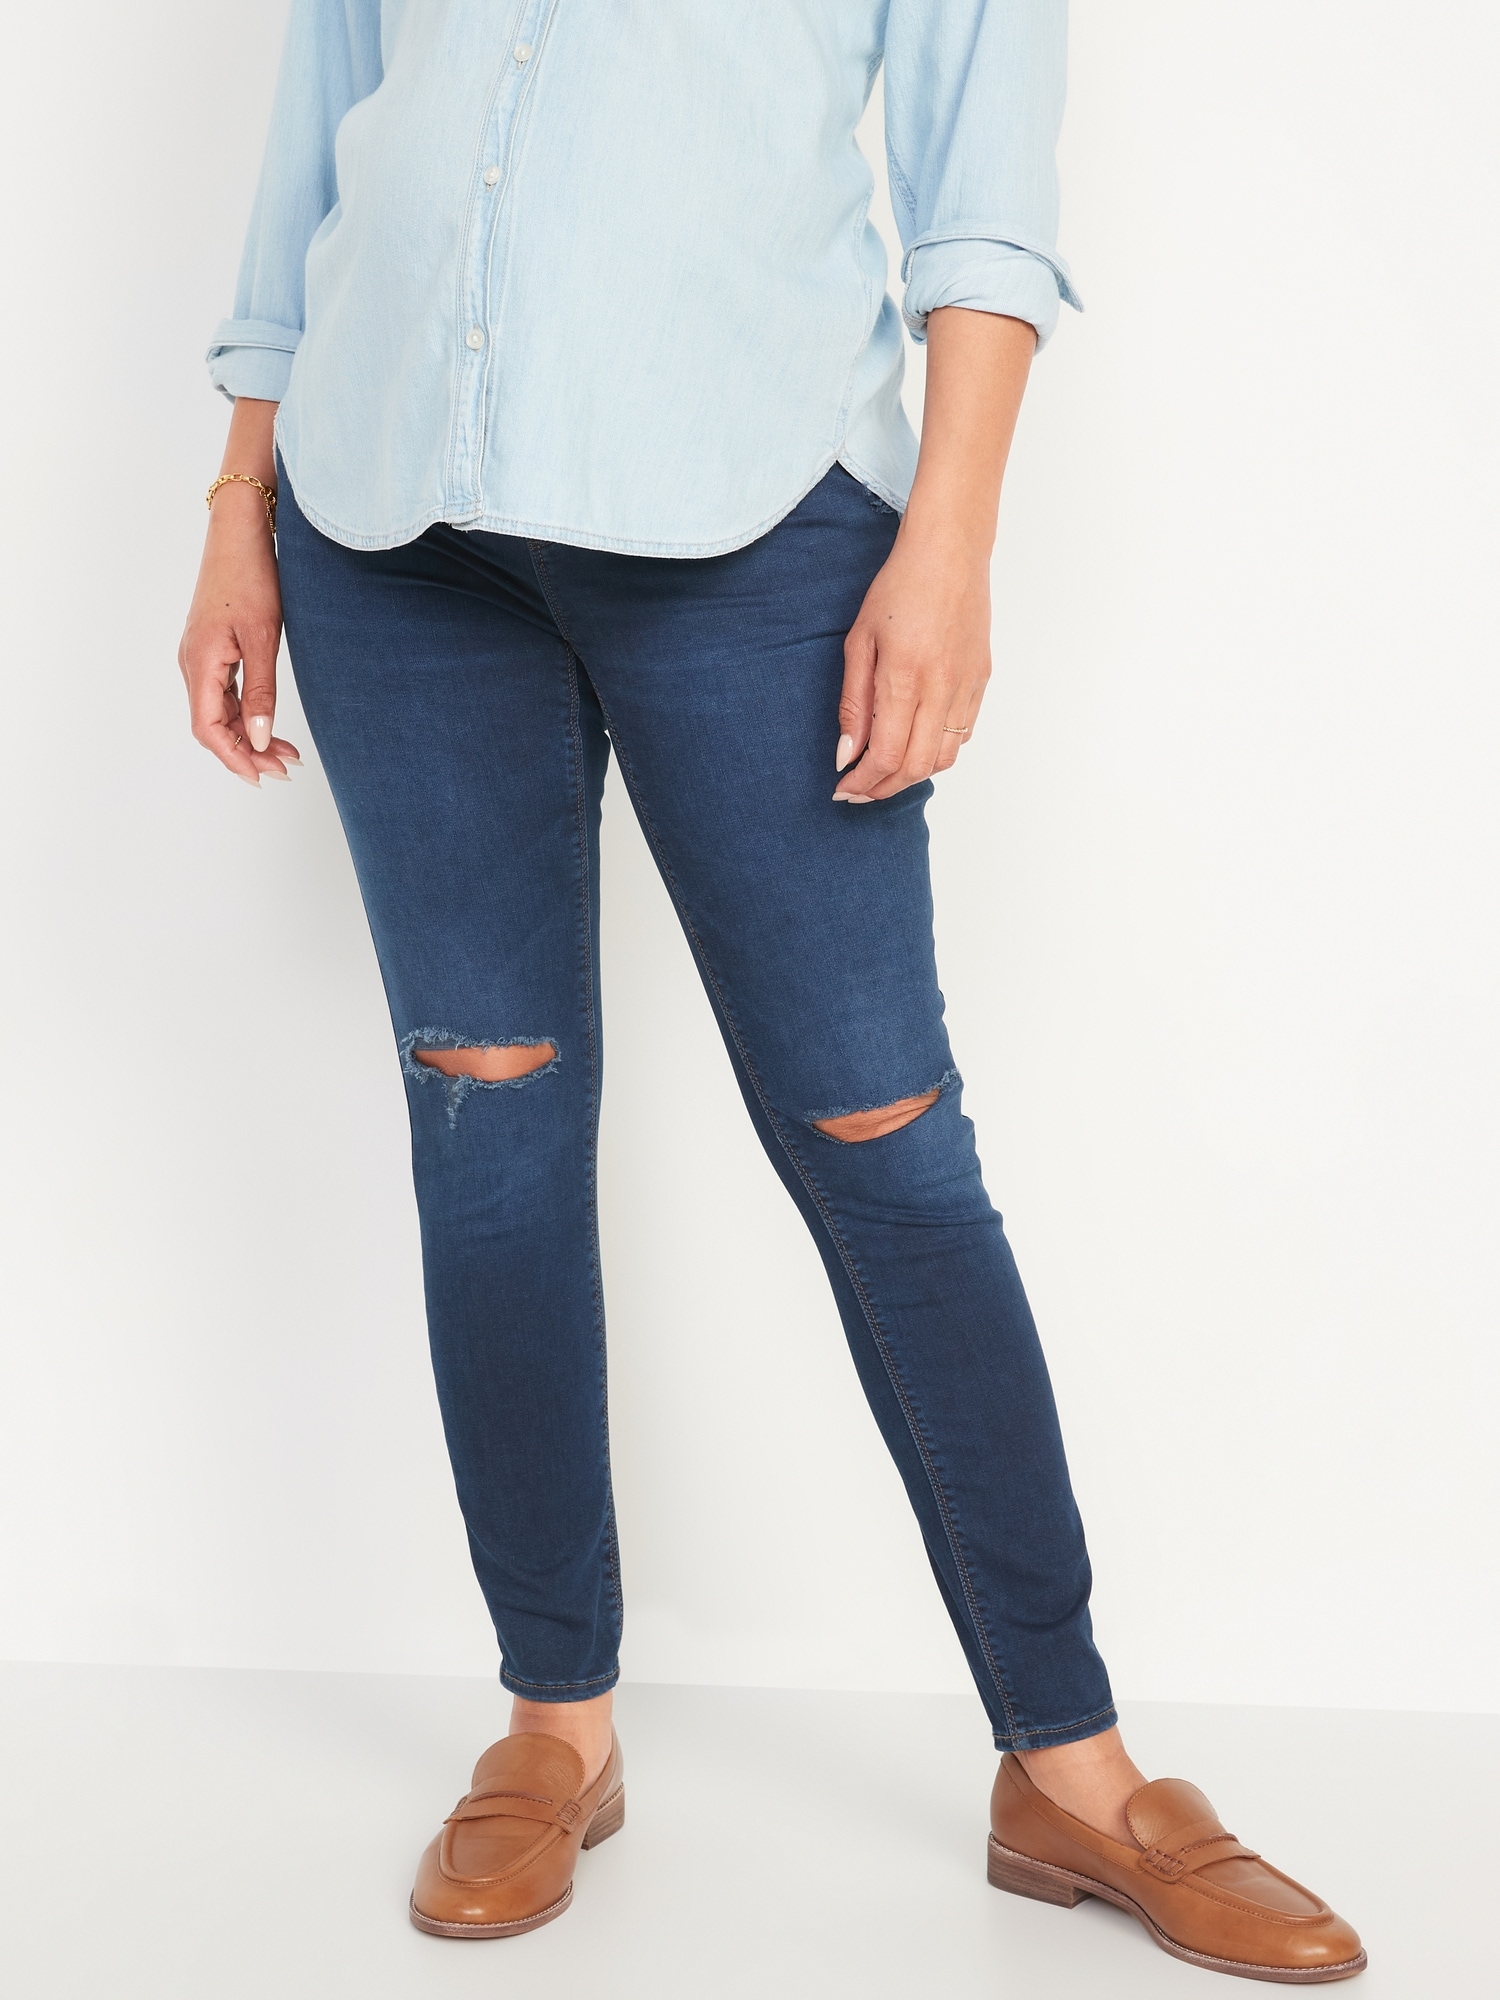 Old Navy Maternity Premium Full Panel FitsYou 3-Sizes-in-1 Rockstar Super Skinny Ripped Jeans